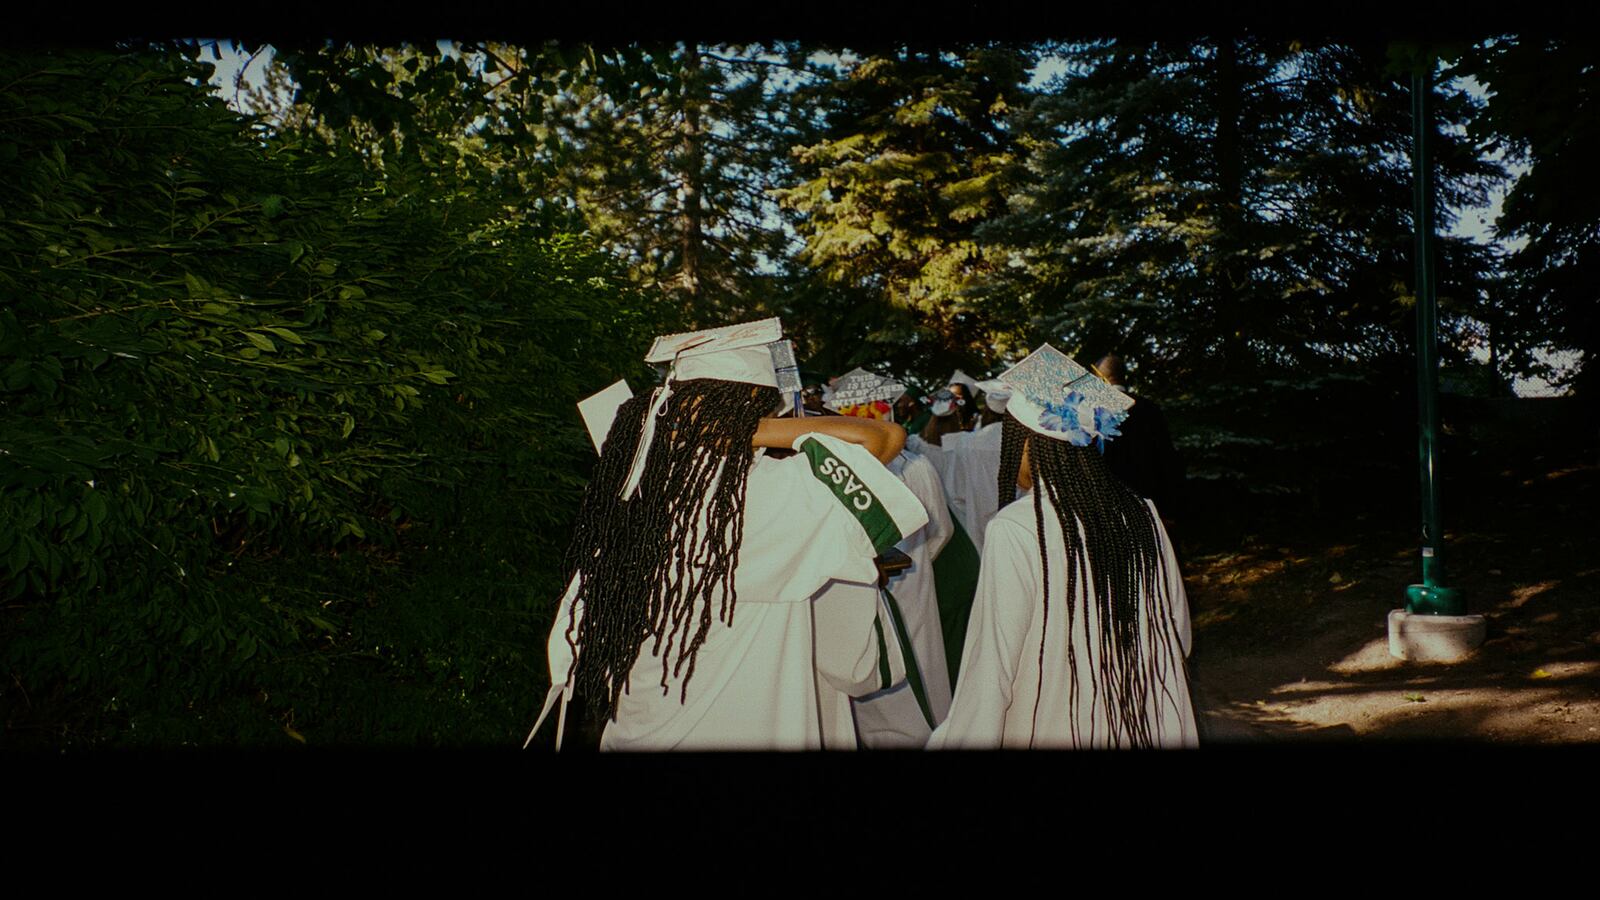 A group of young women wearing white graduation regalia make their way to their ceremony, their long braided hair running down their gowns with a green ribbon reading “CASS” on one of their arms.